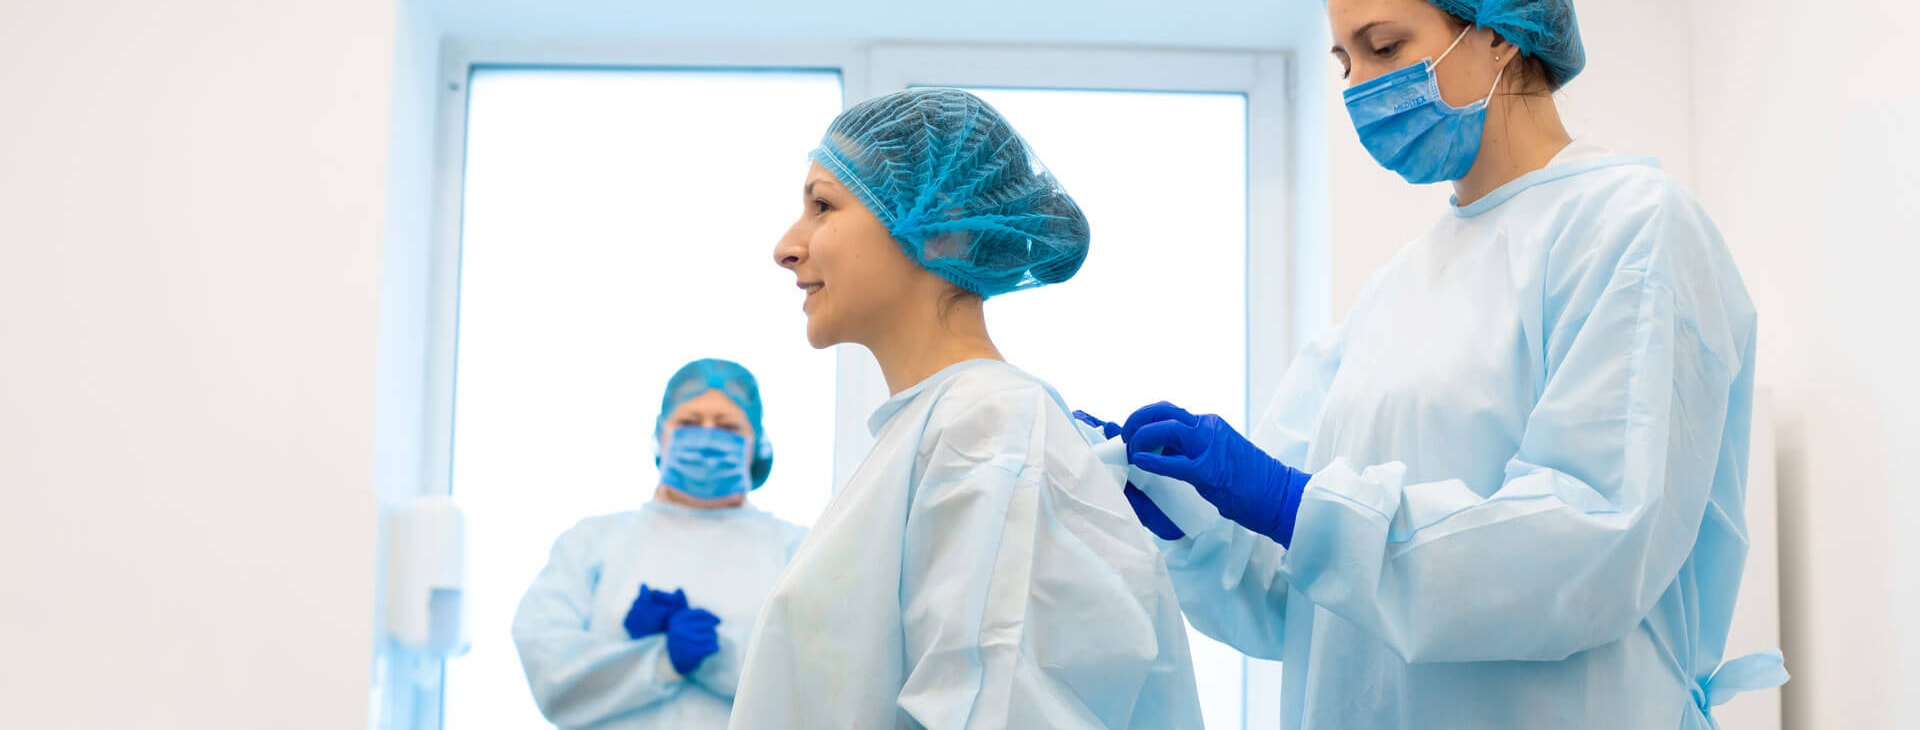 Medical industry shown with personnel in scrubs, gloves